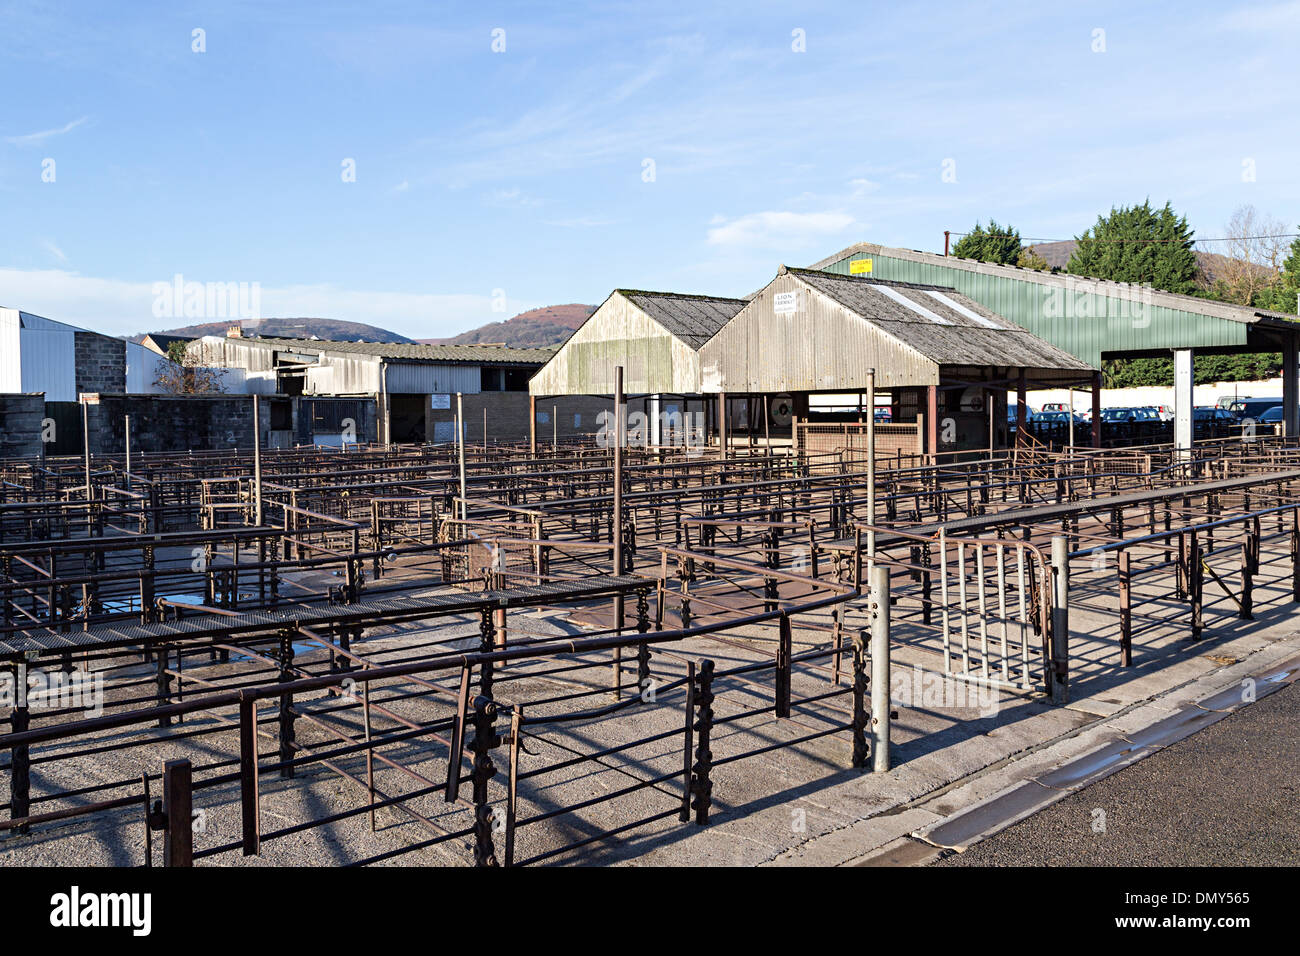 Empty livestock market just after final closure in December 2013, Abergavenny, Wales, UK Stock Photo